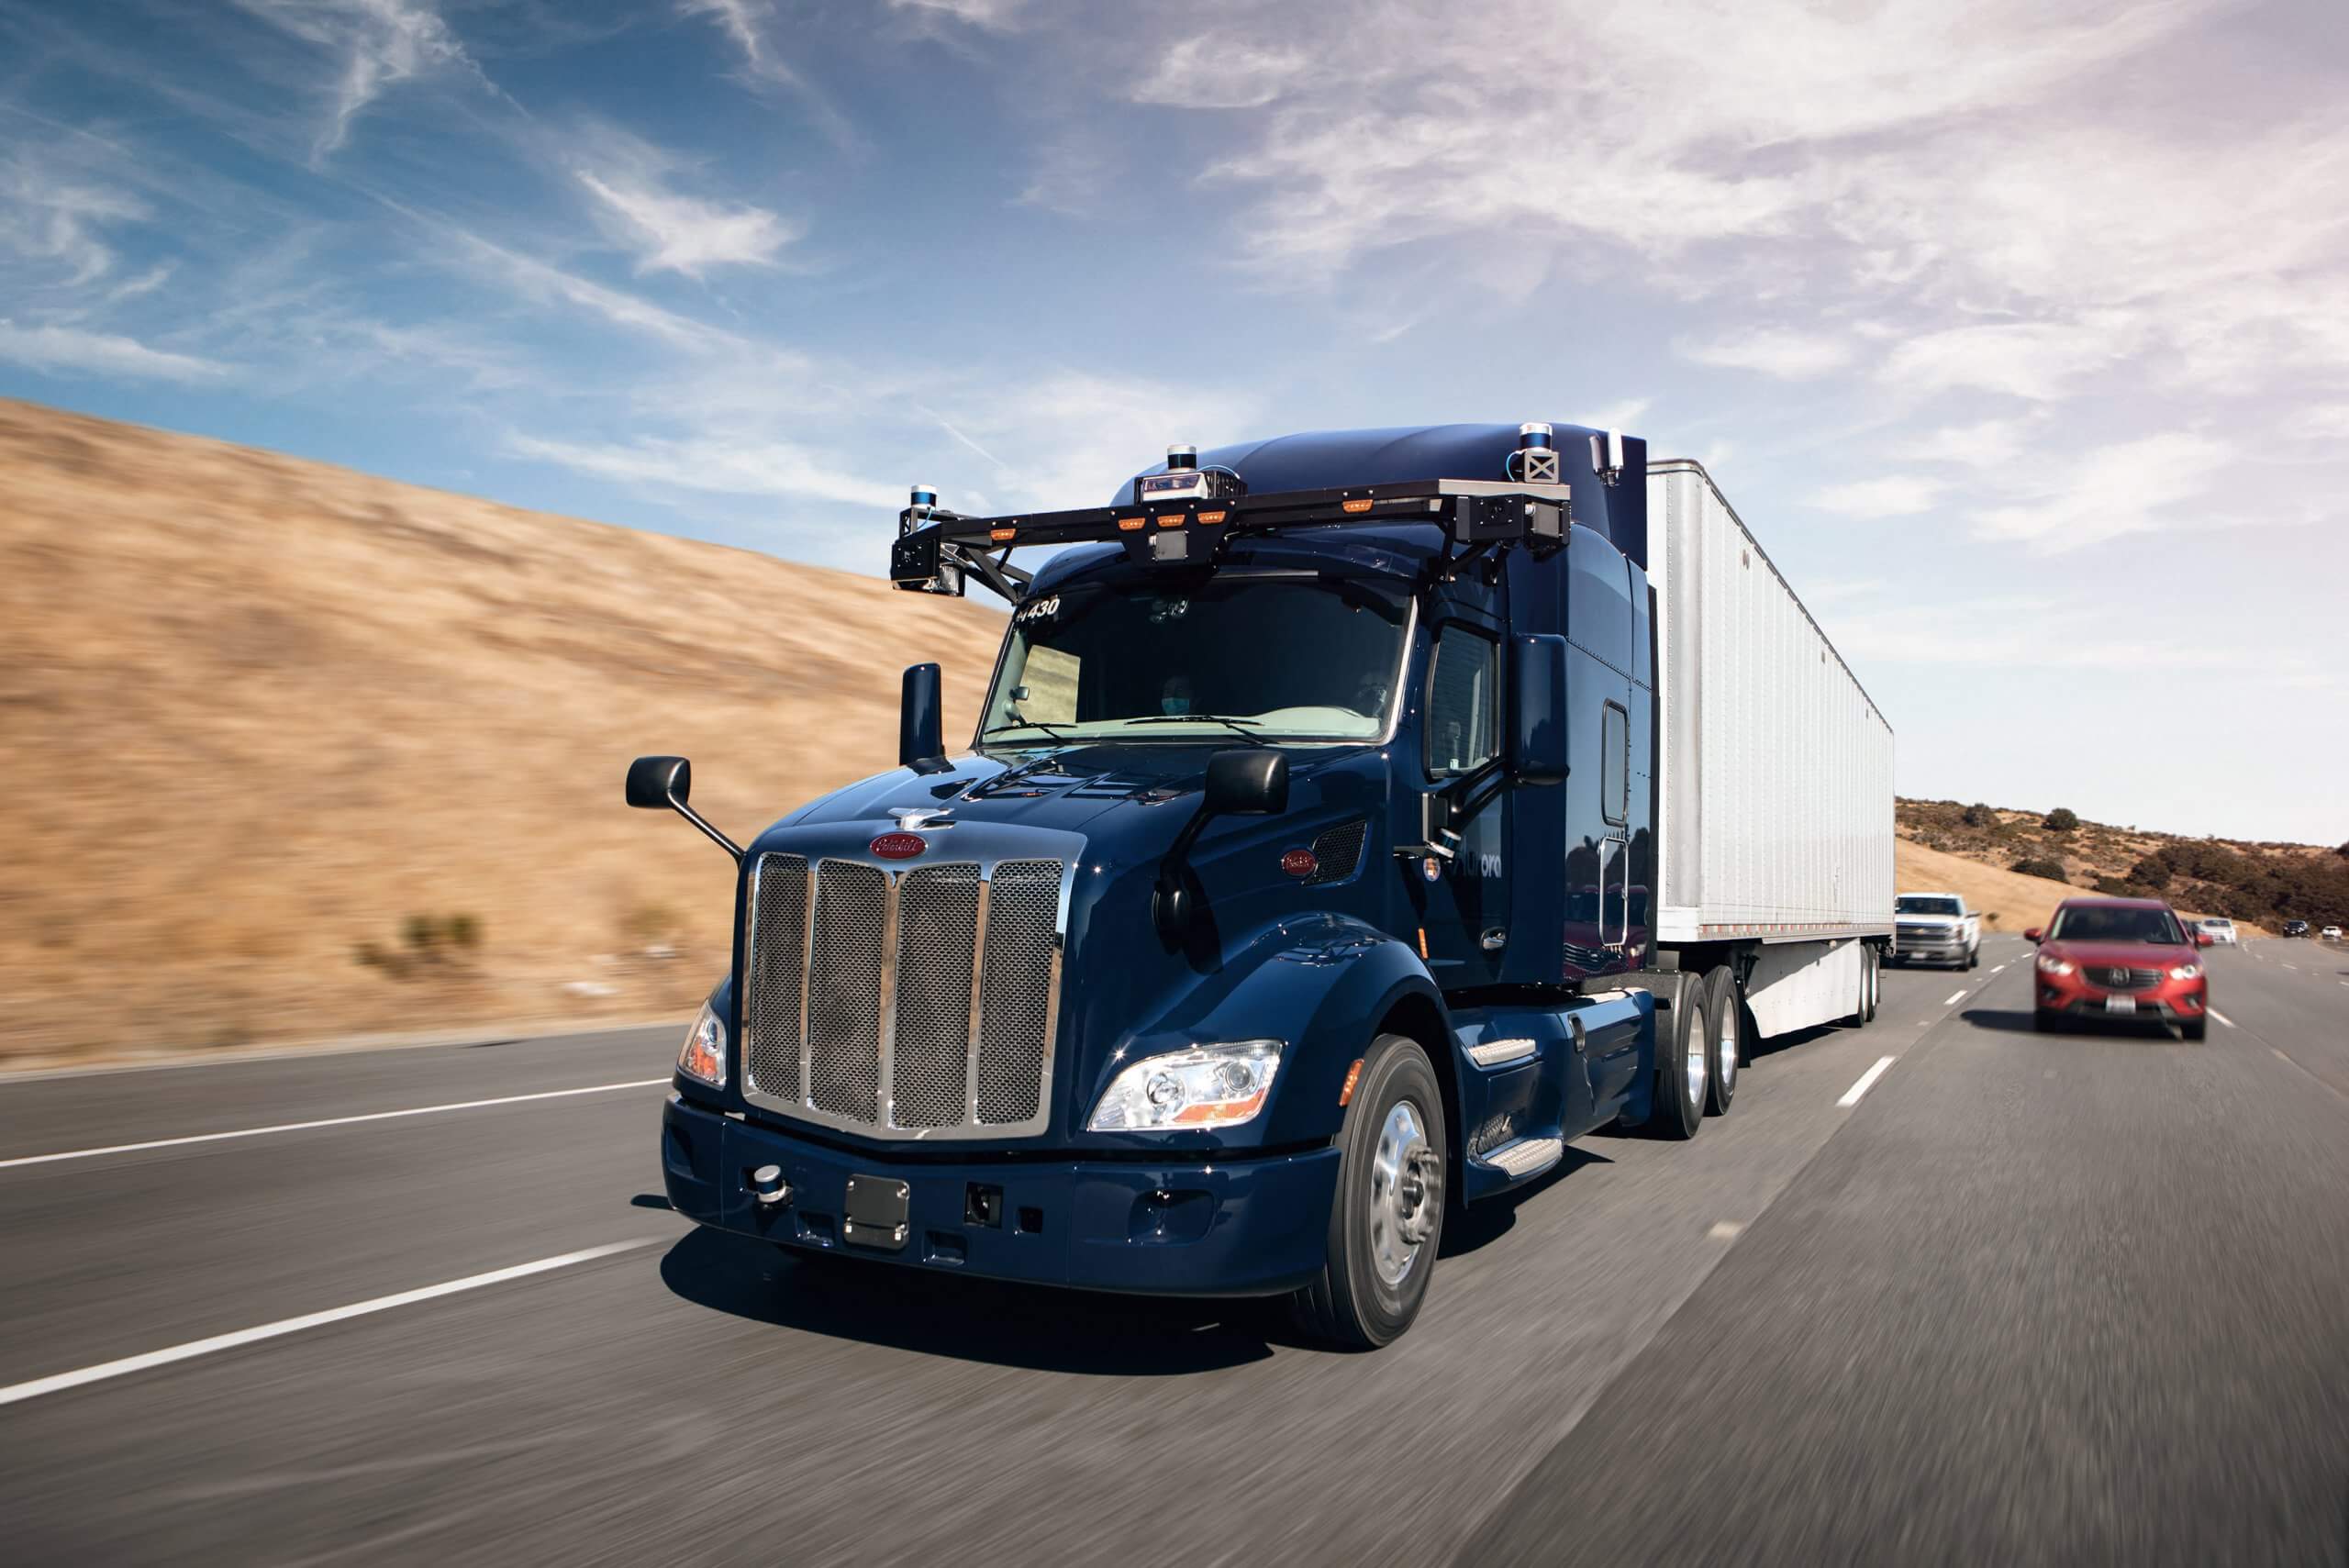 The US Advocates for Highway and Auto Safety are also skeptical as the robot trucks technology is still unproven, and have said that these test products should not be on the roads.